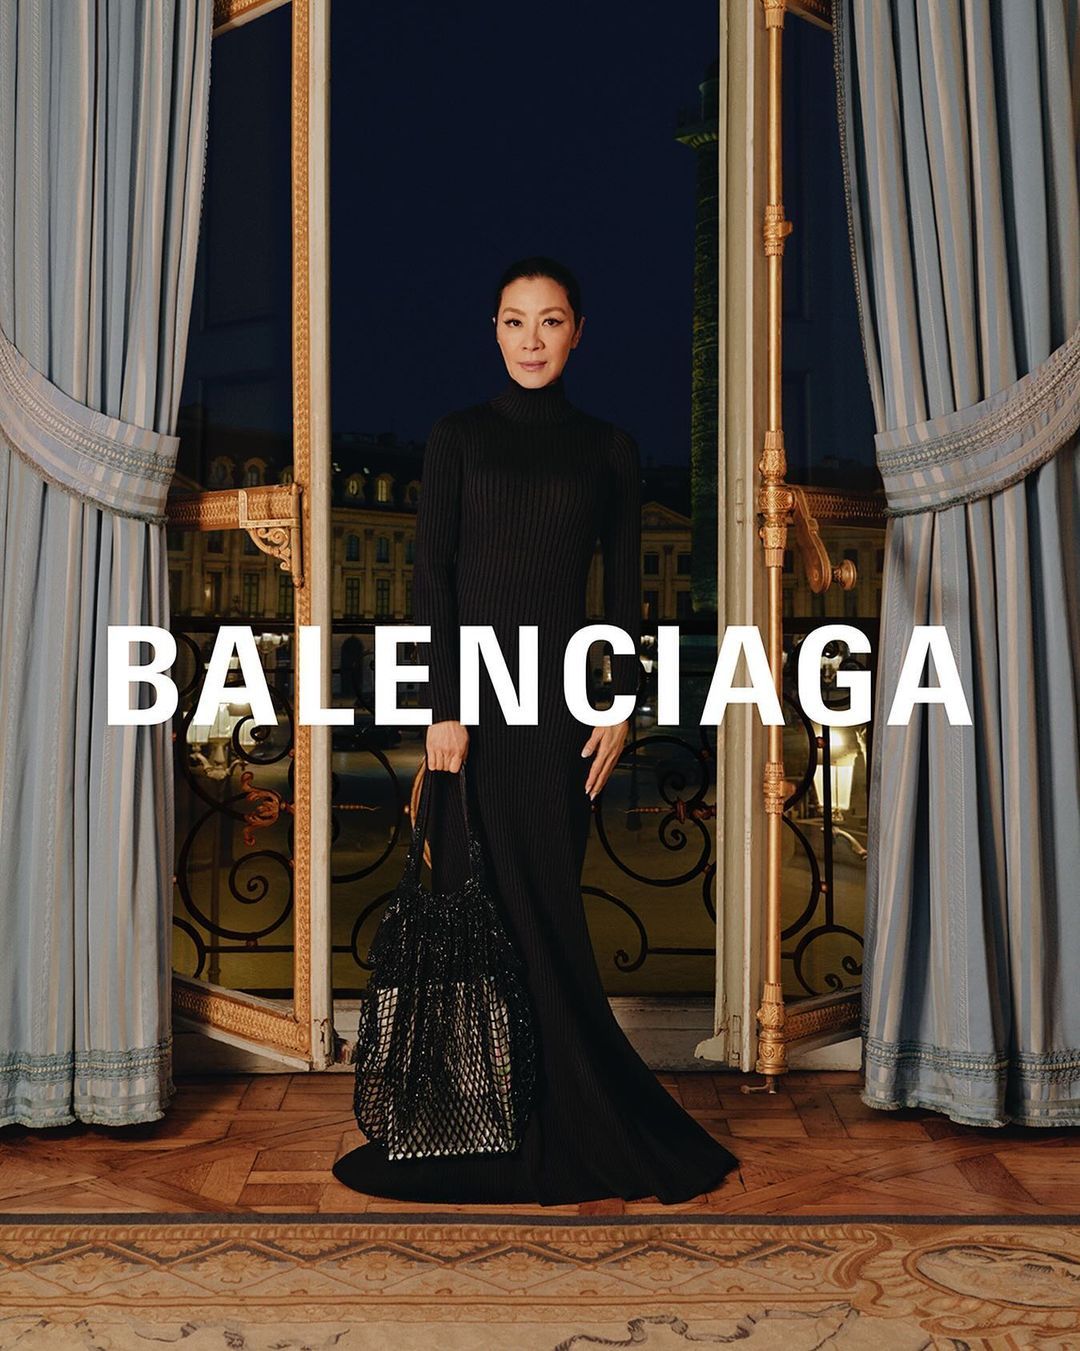 Michelle Yeoh crowned as Balenciaga’s newest brand ambassador